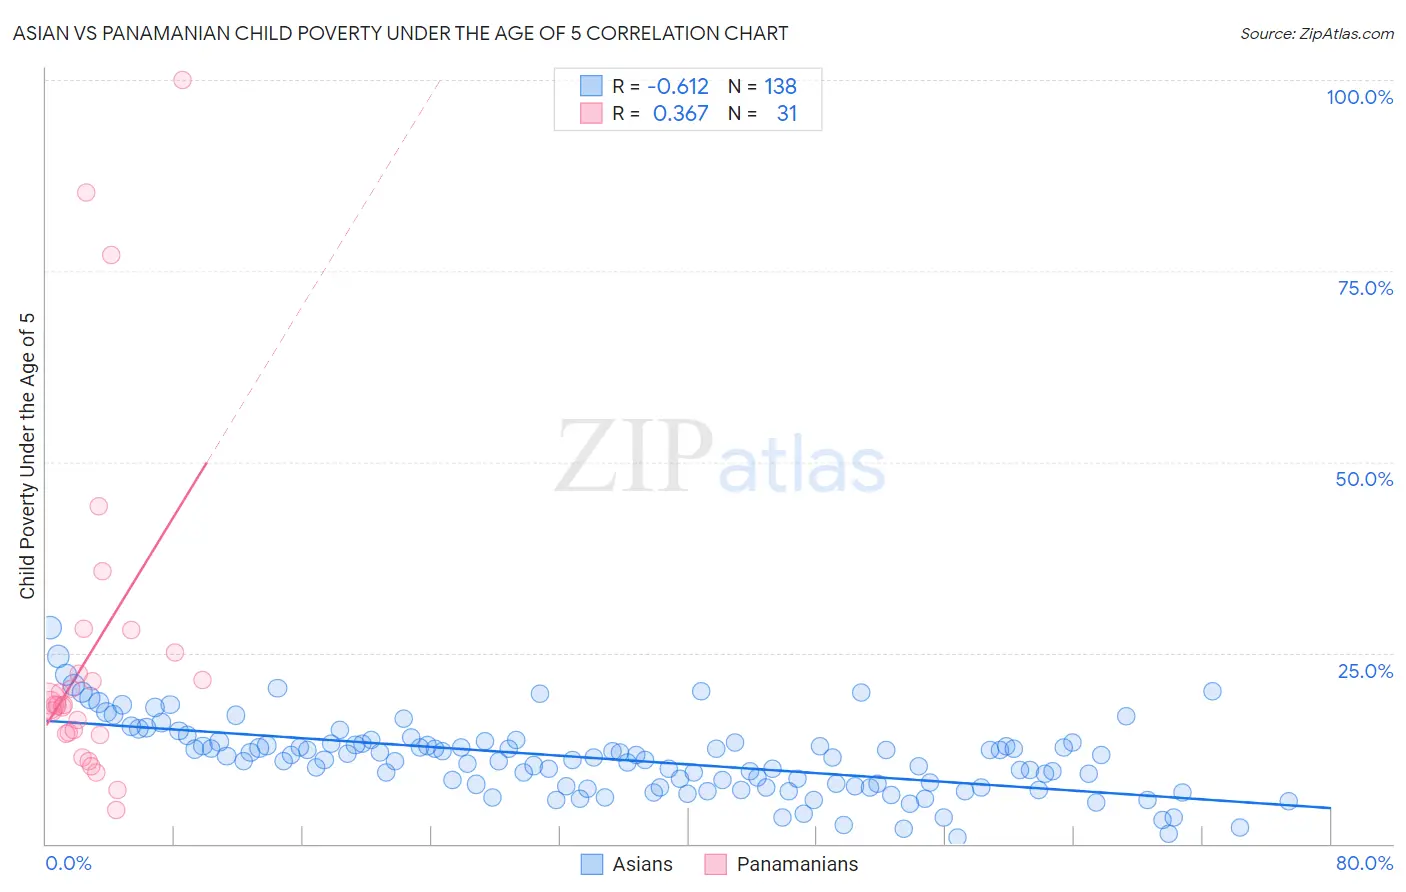 Asian vs Panamanian Child Poverty Under the Age of 5